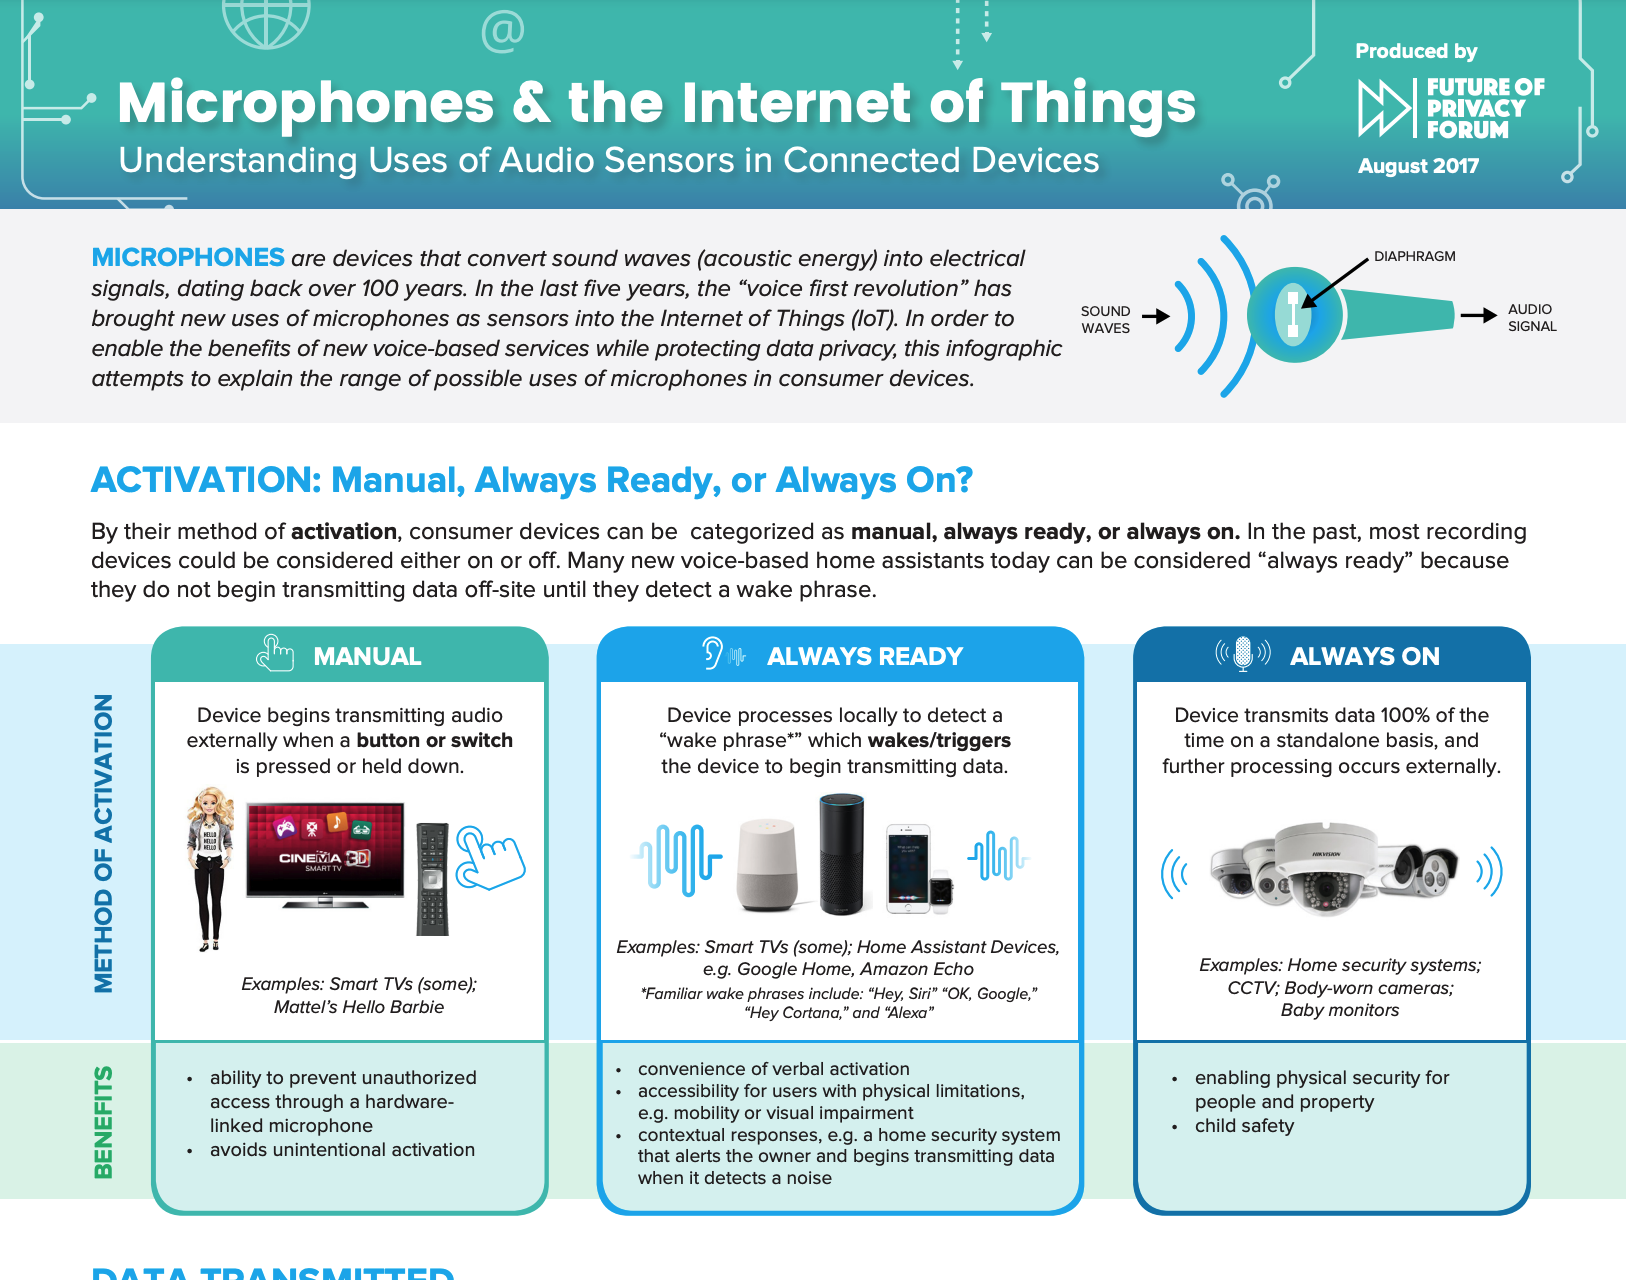 Microphones & the Internet of Things